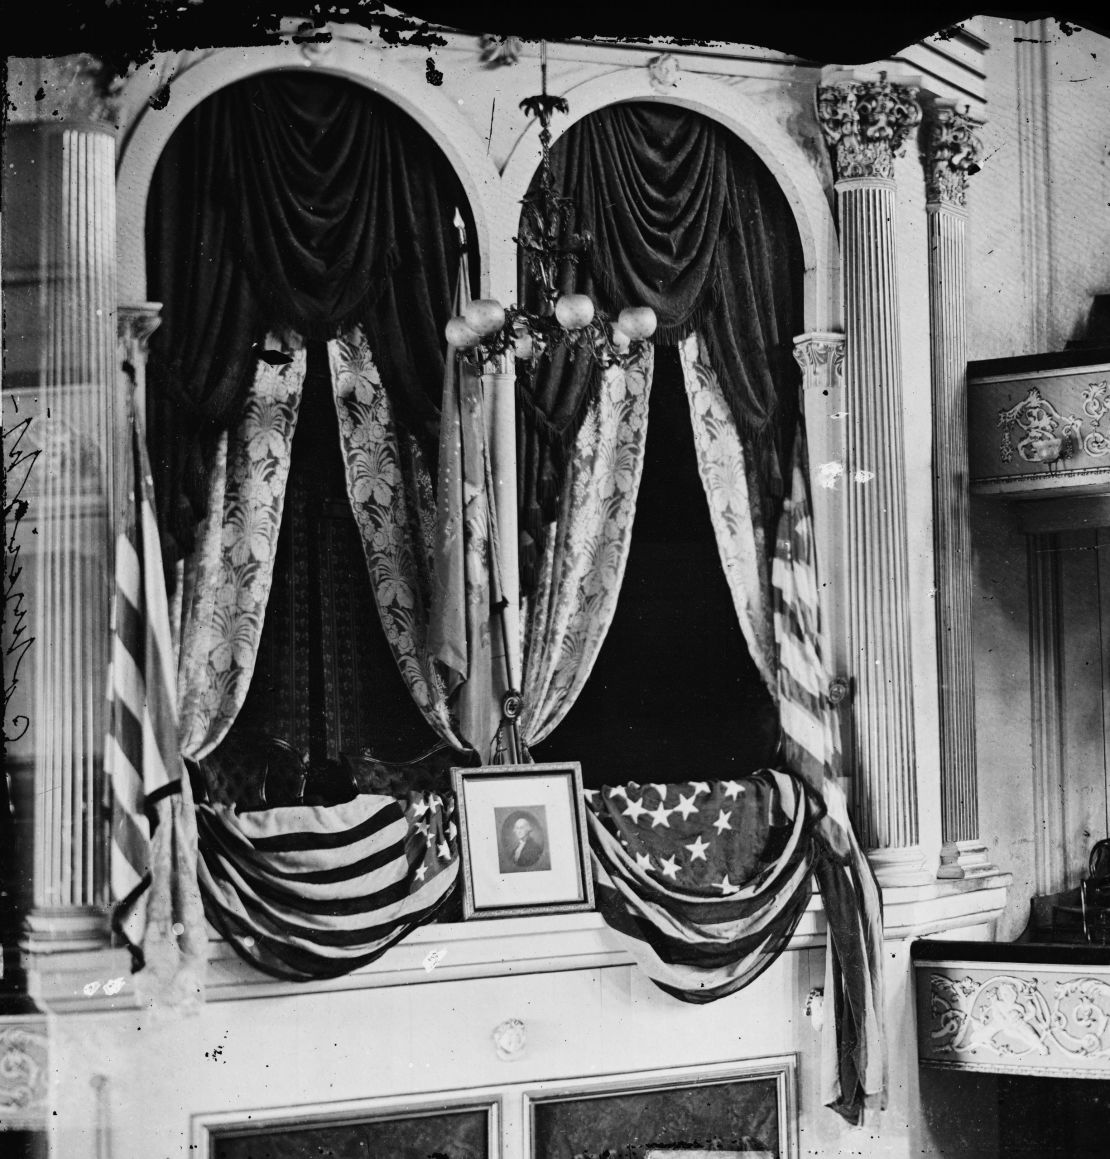 President Lincoln was shot in April 1865 while sitting in the State Box at Ford's Theatre in Washington.